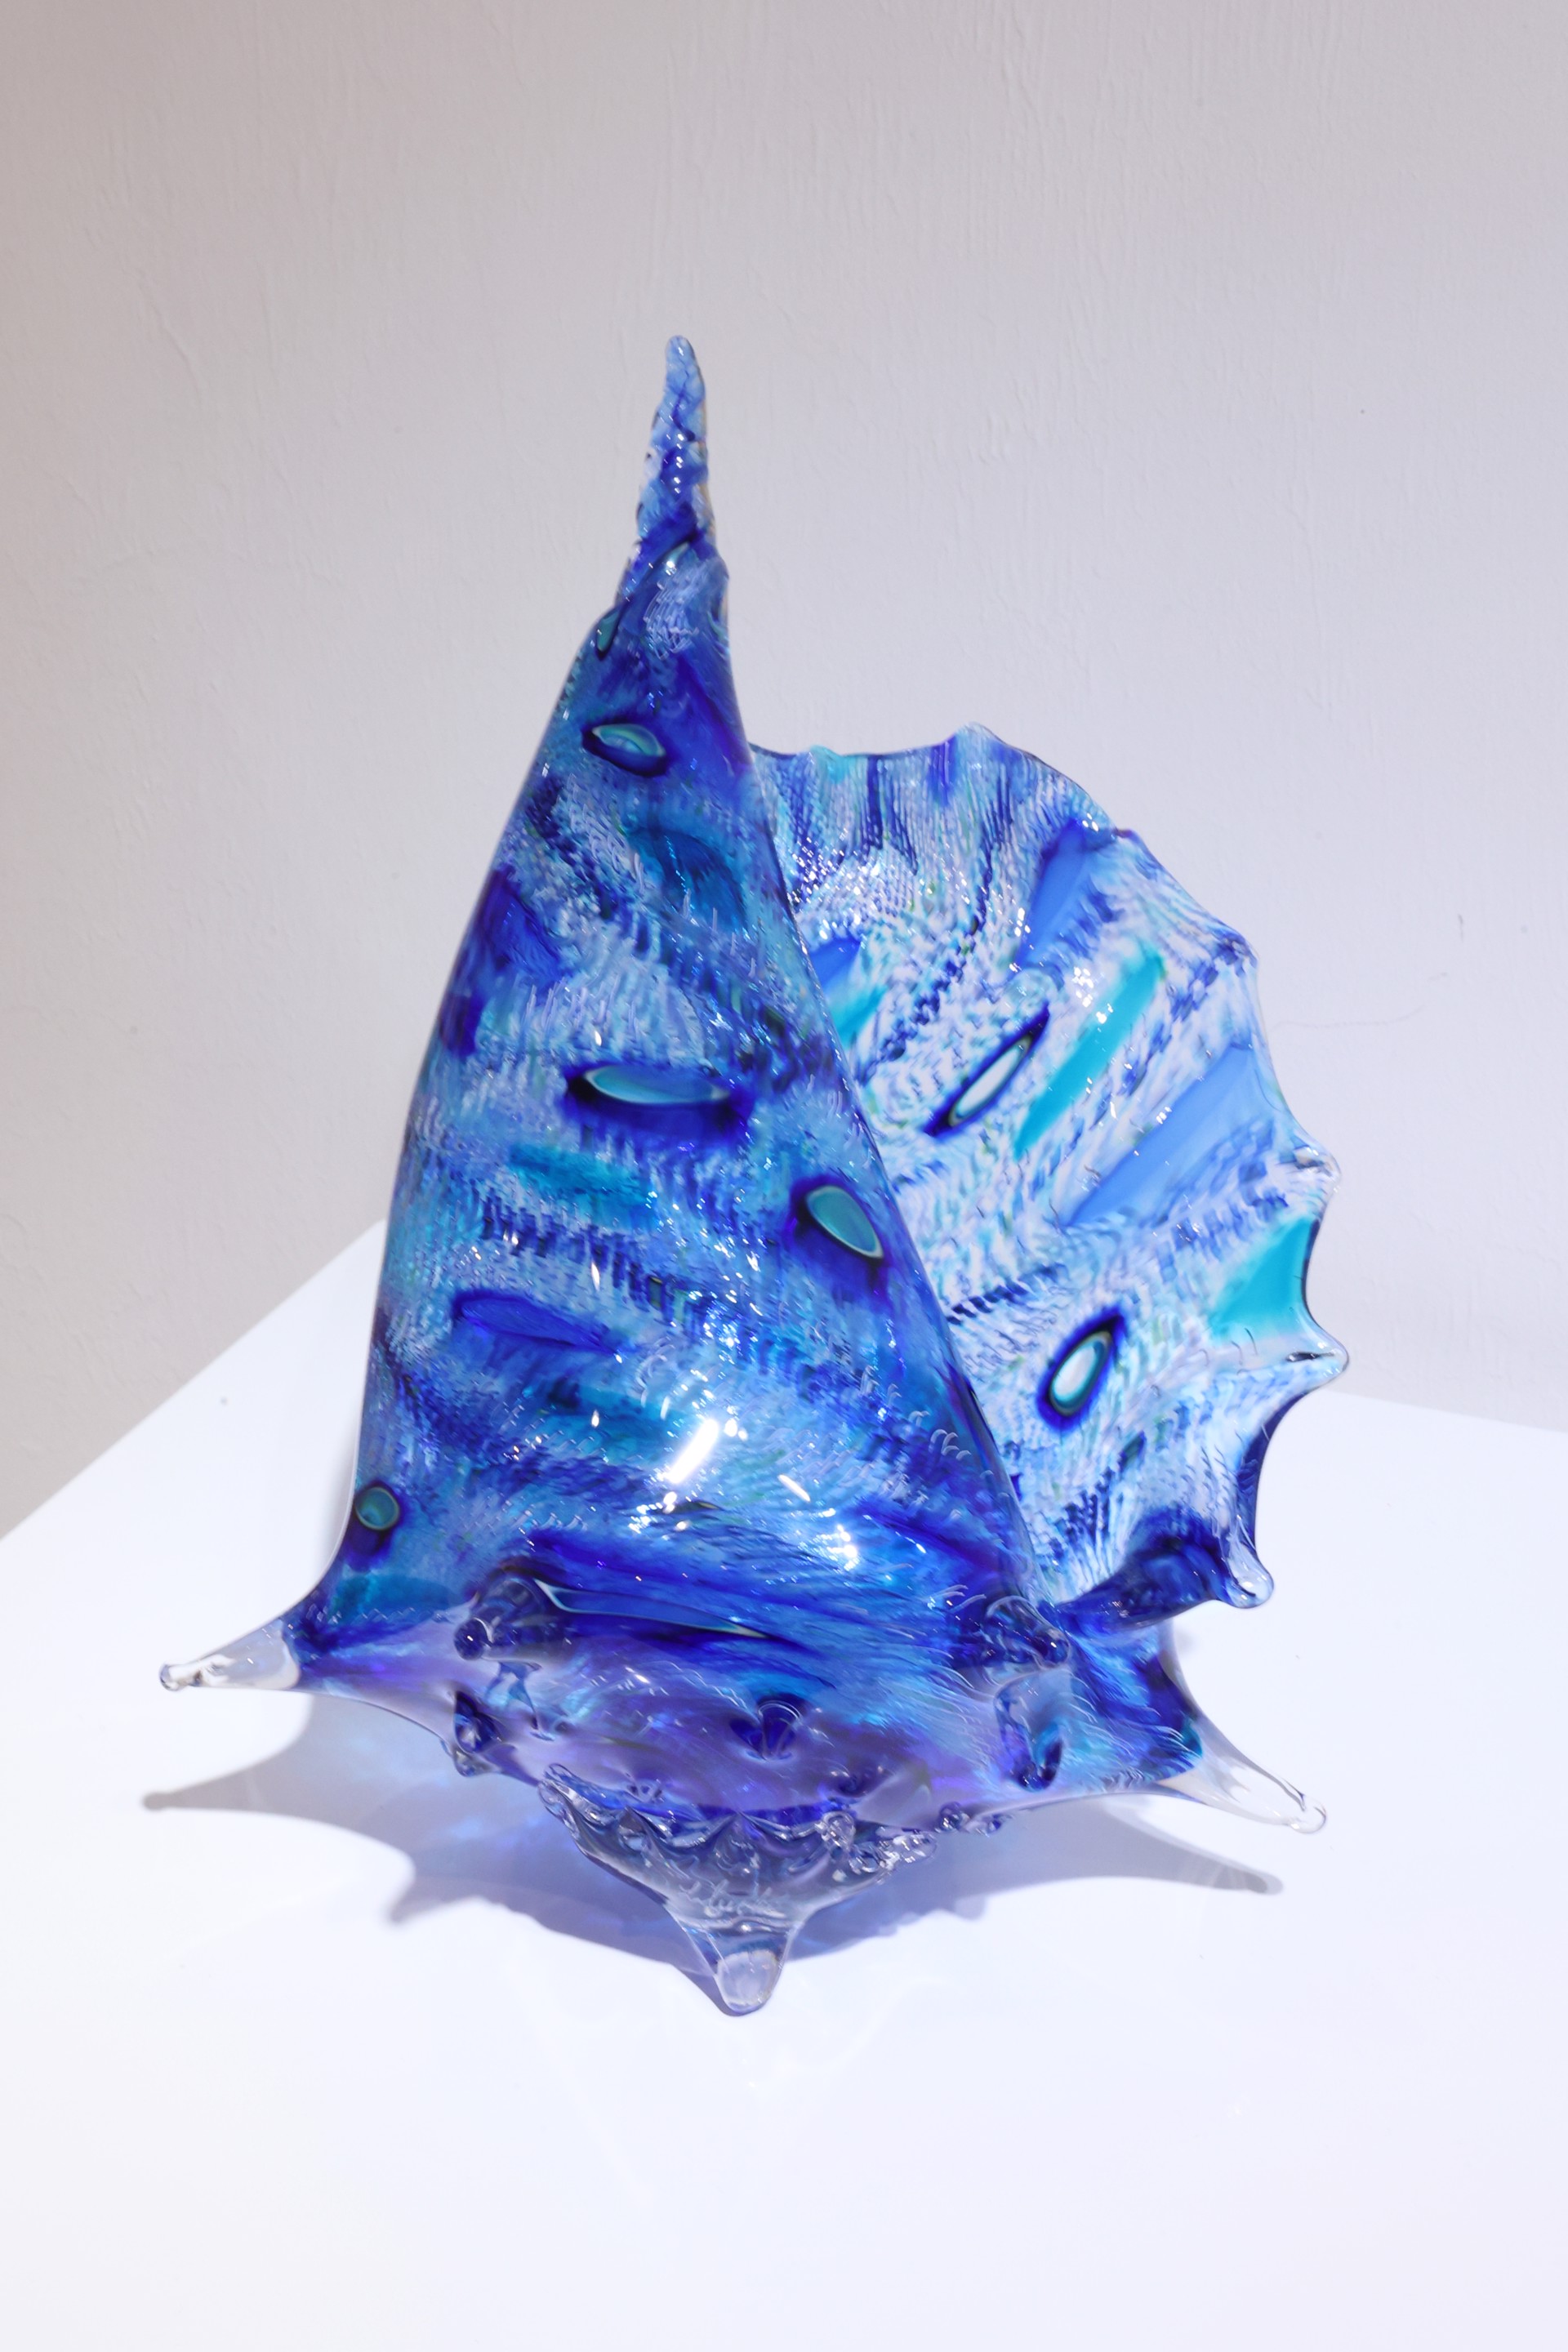 "Blue Conch" by Andrew Libecki